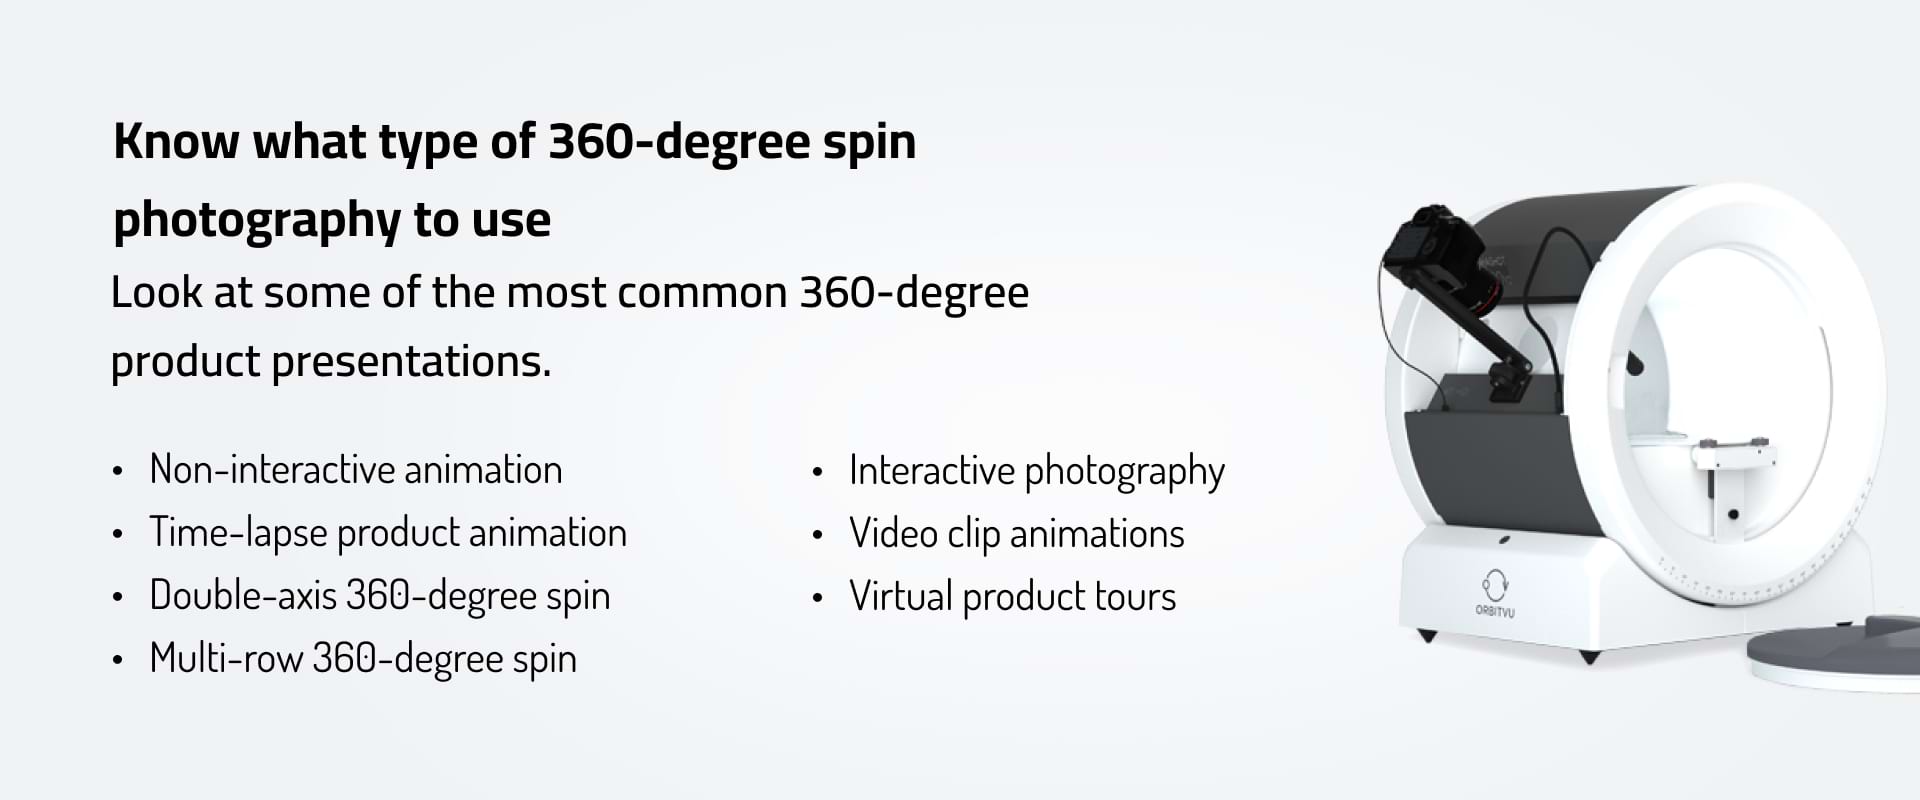 Know What Type of 360-Degree Spin Photography to Use 